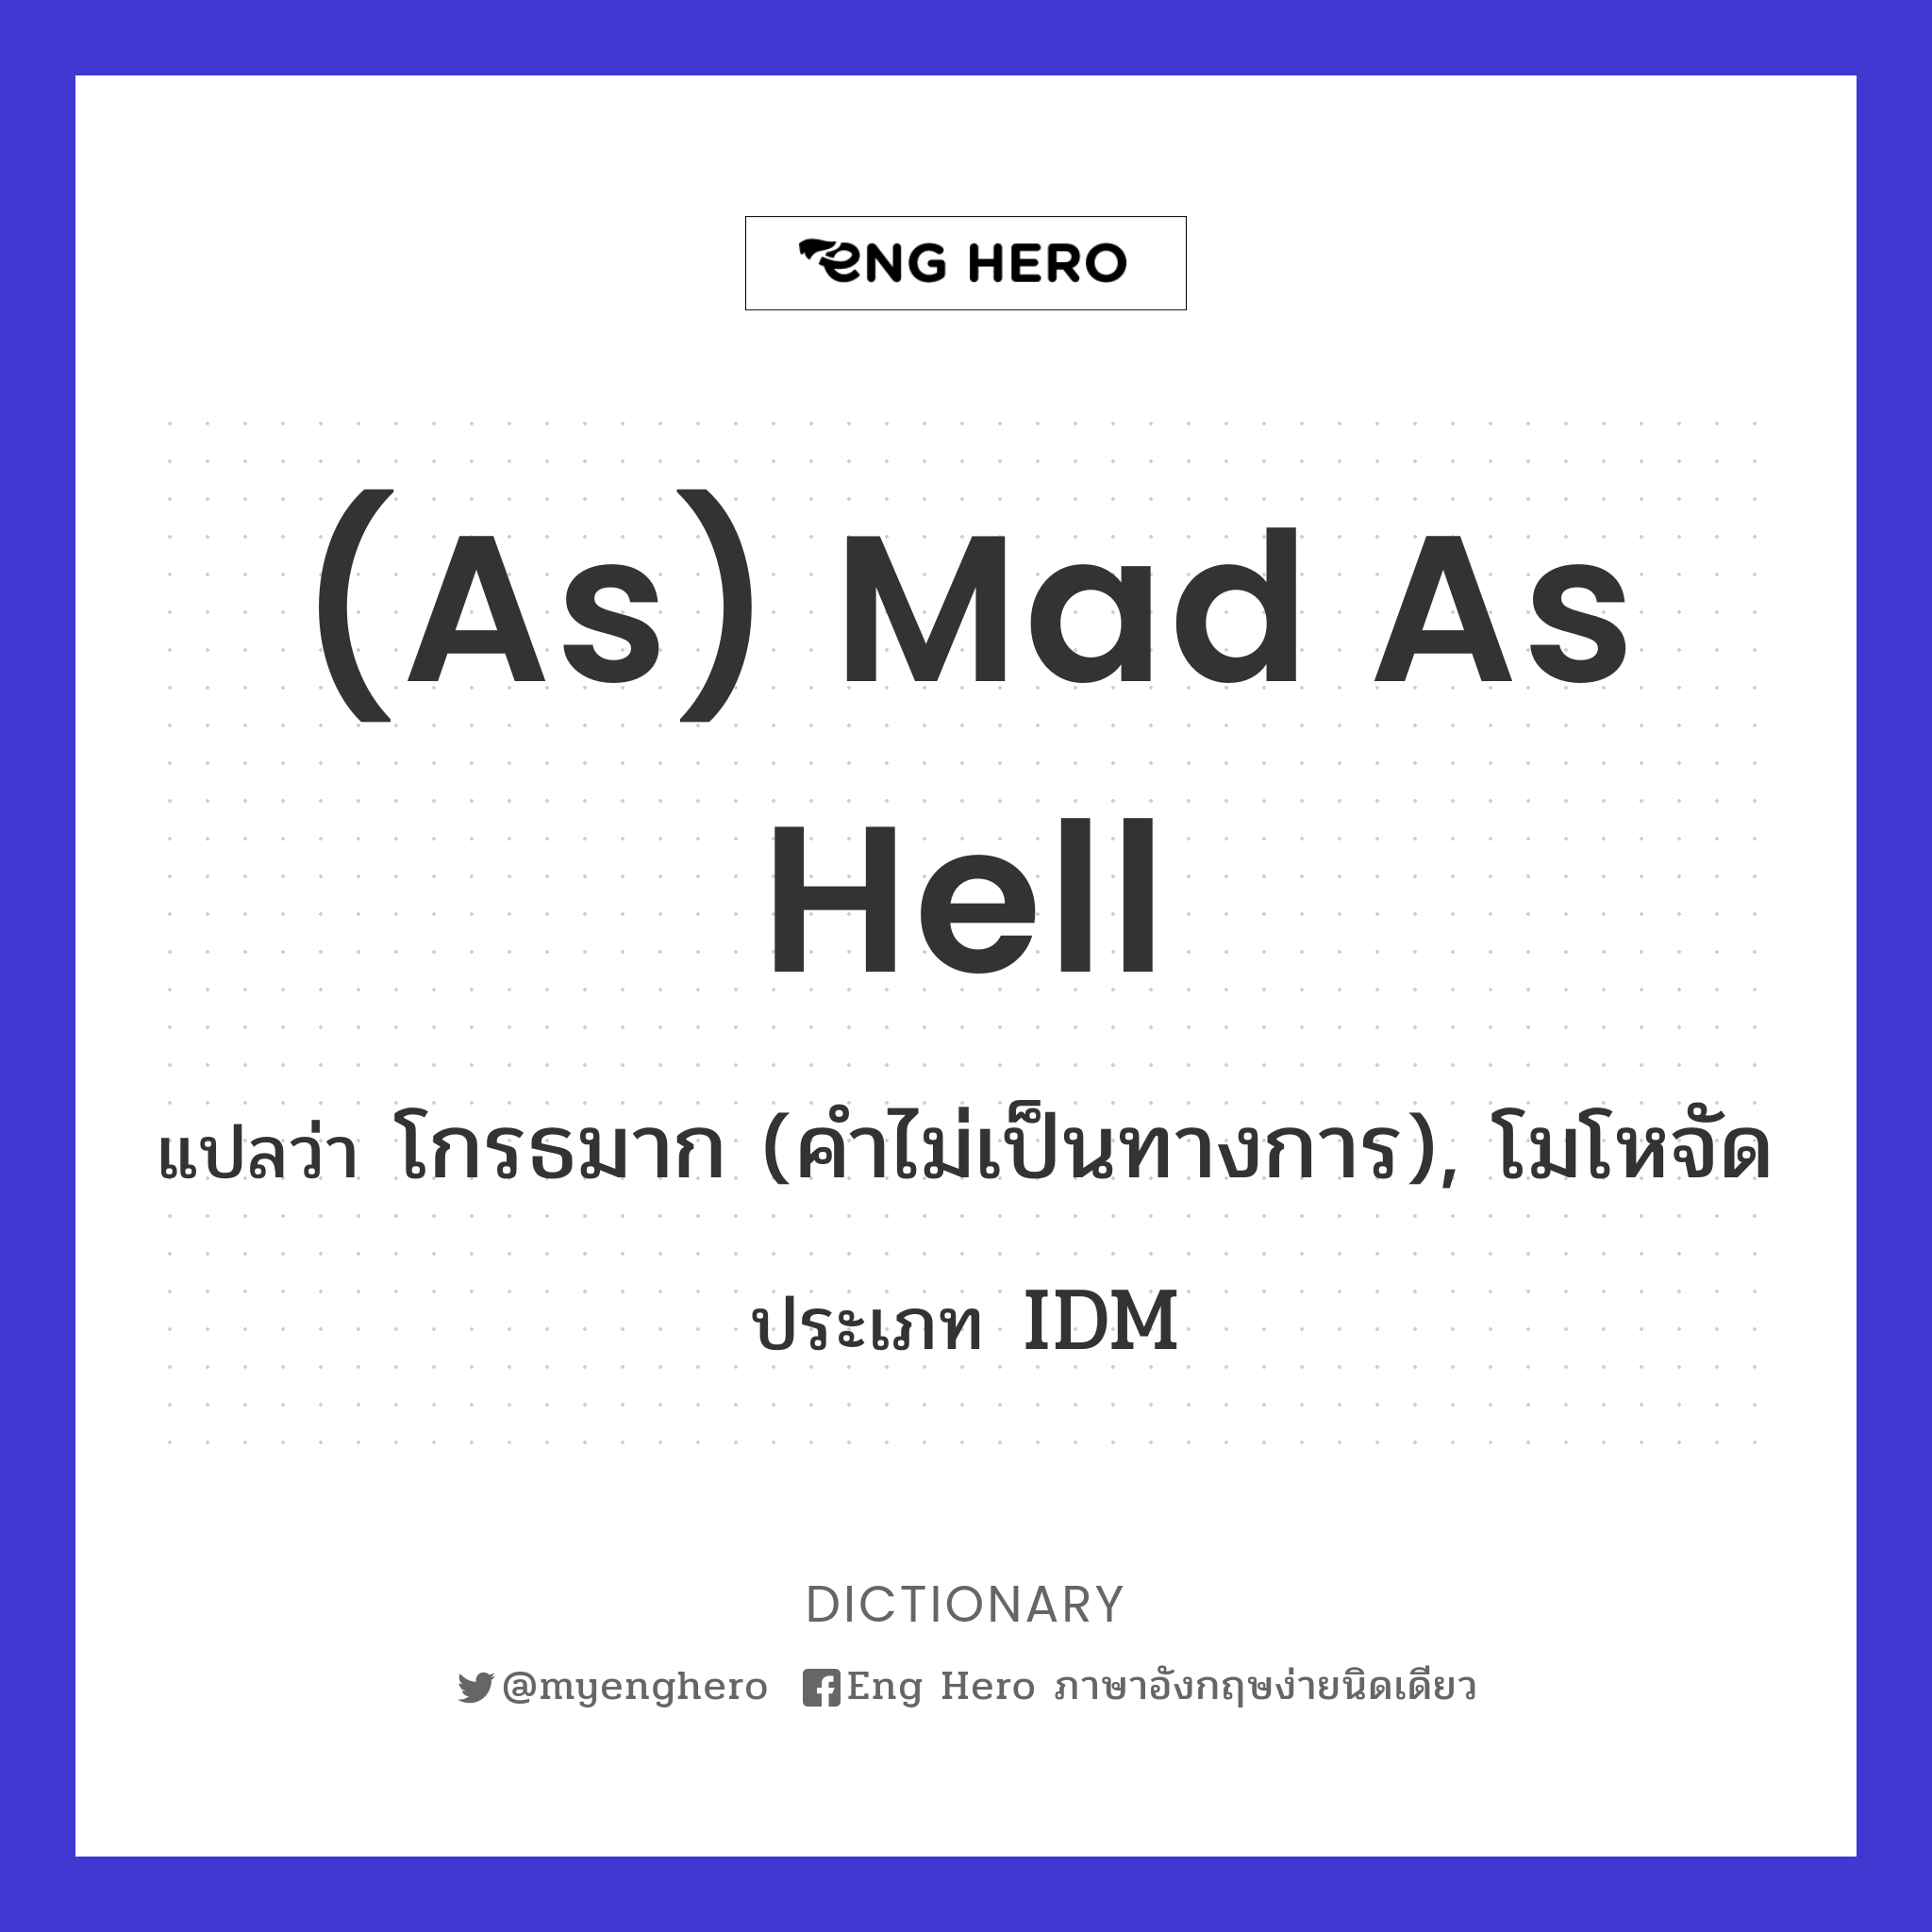 (as) mad as hell